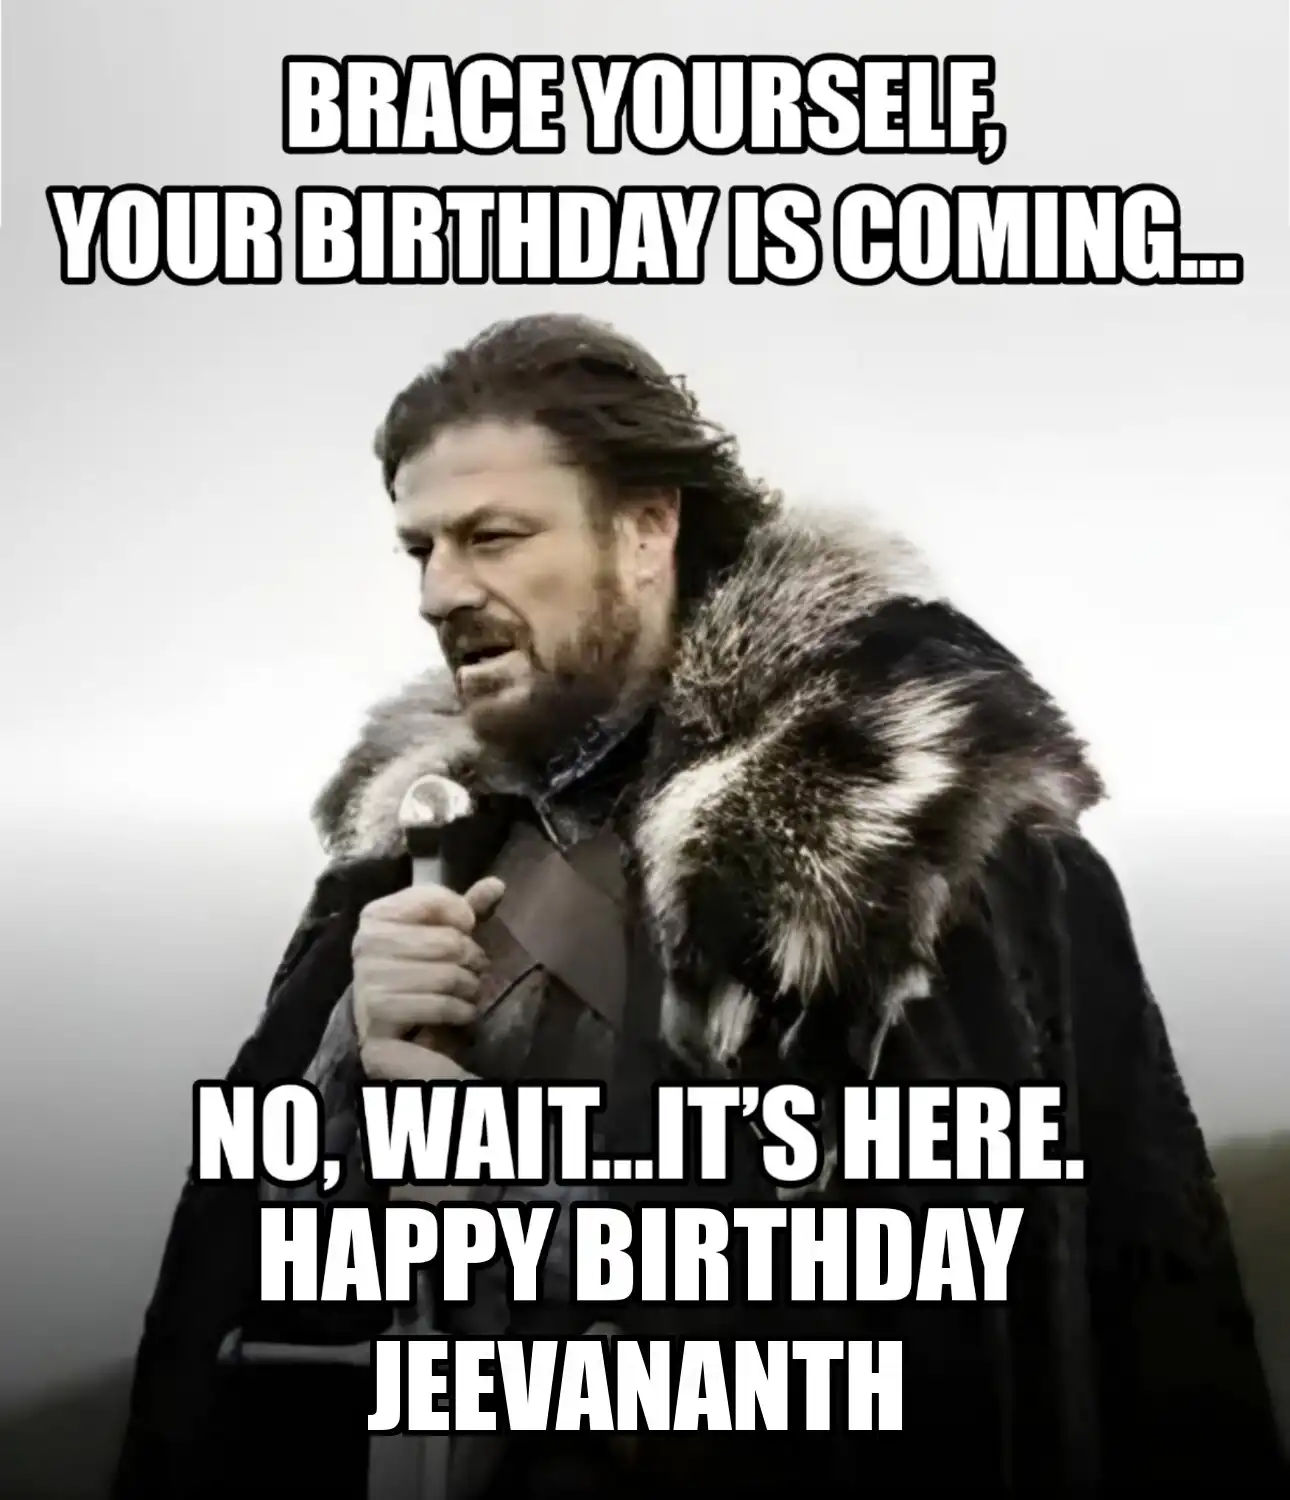 Happy Birthday Jeevananth Brace Yourself Your Birthday Is Coming Meme